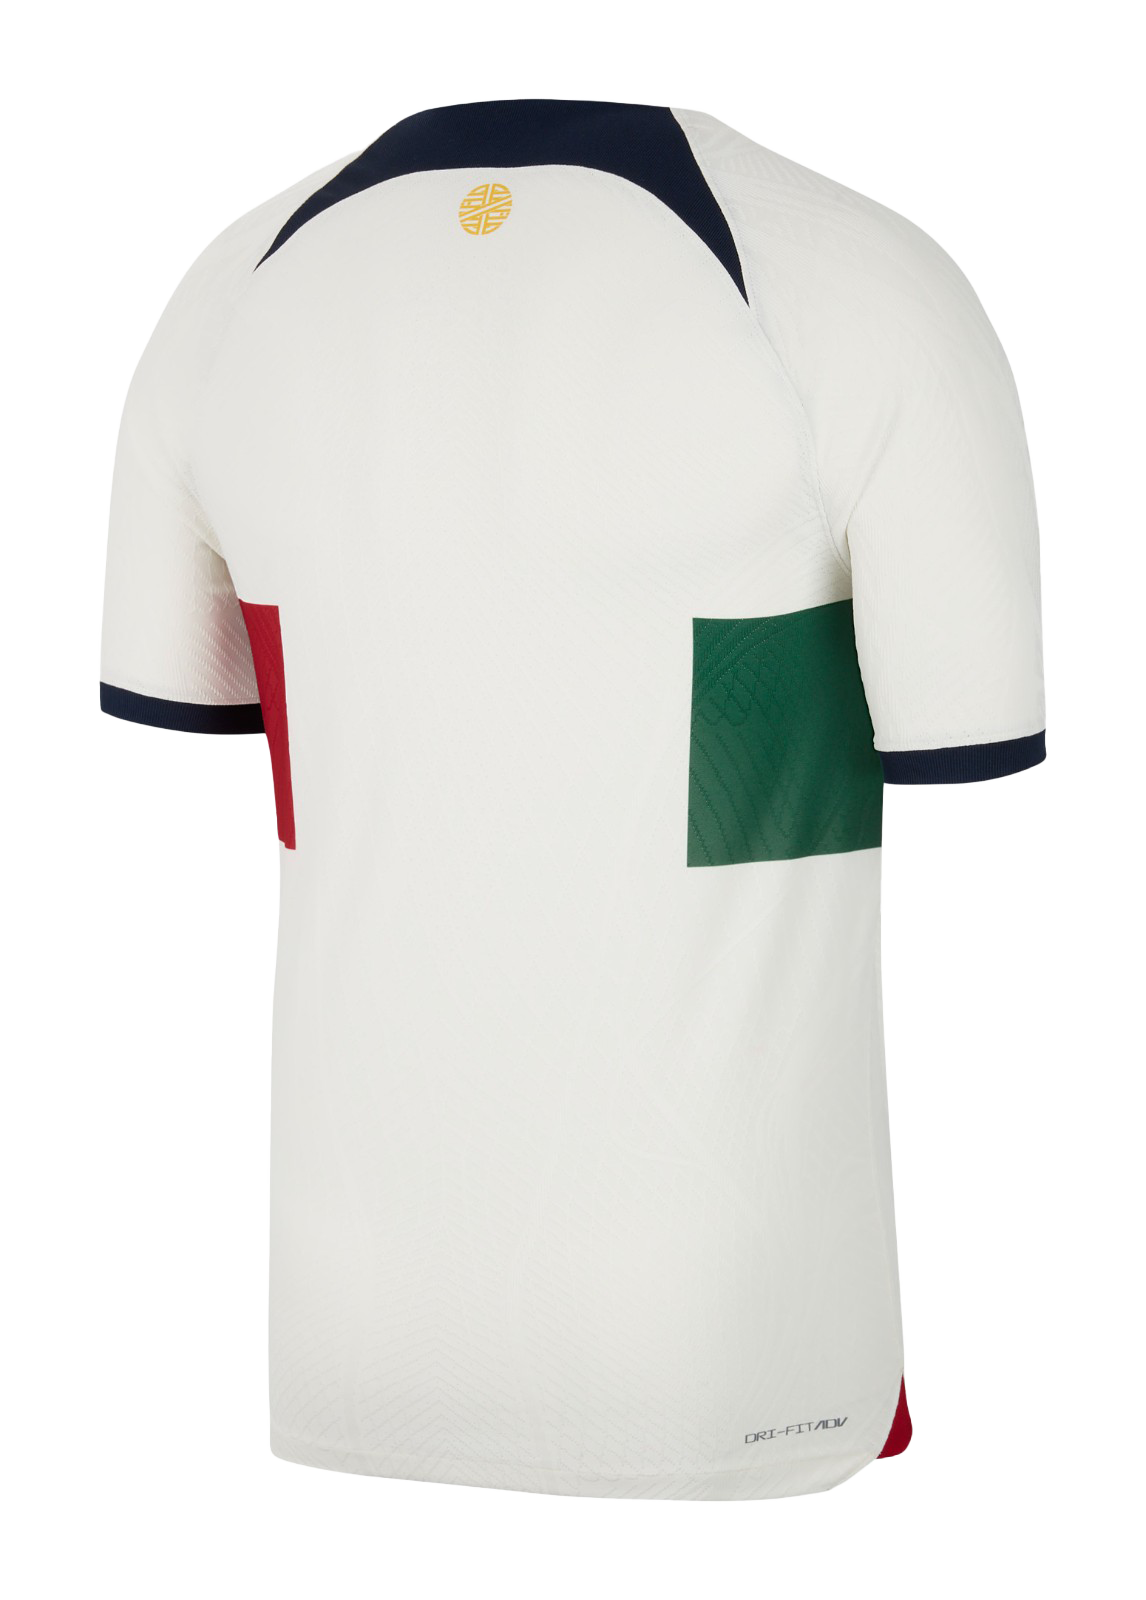 JERSEY PORTUGAL AWAY WORLD CUP 2022